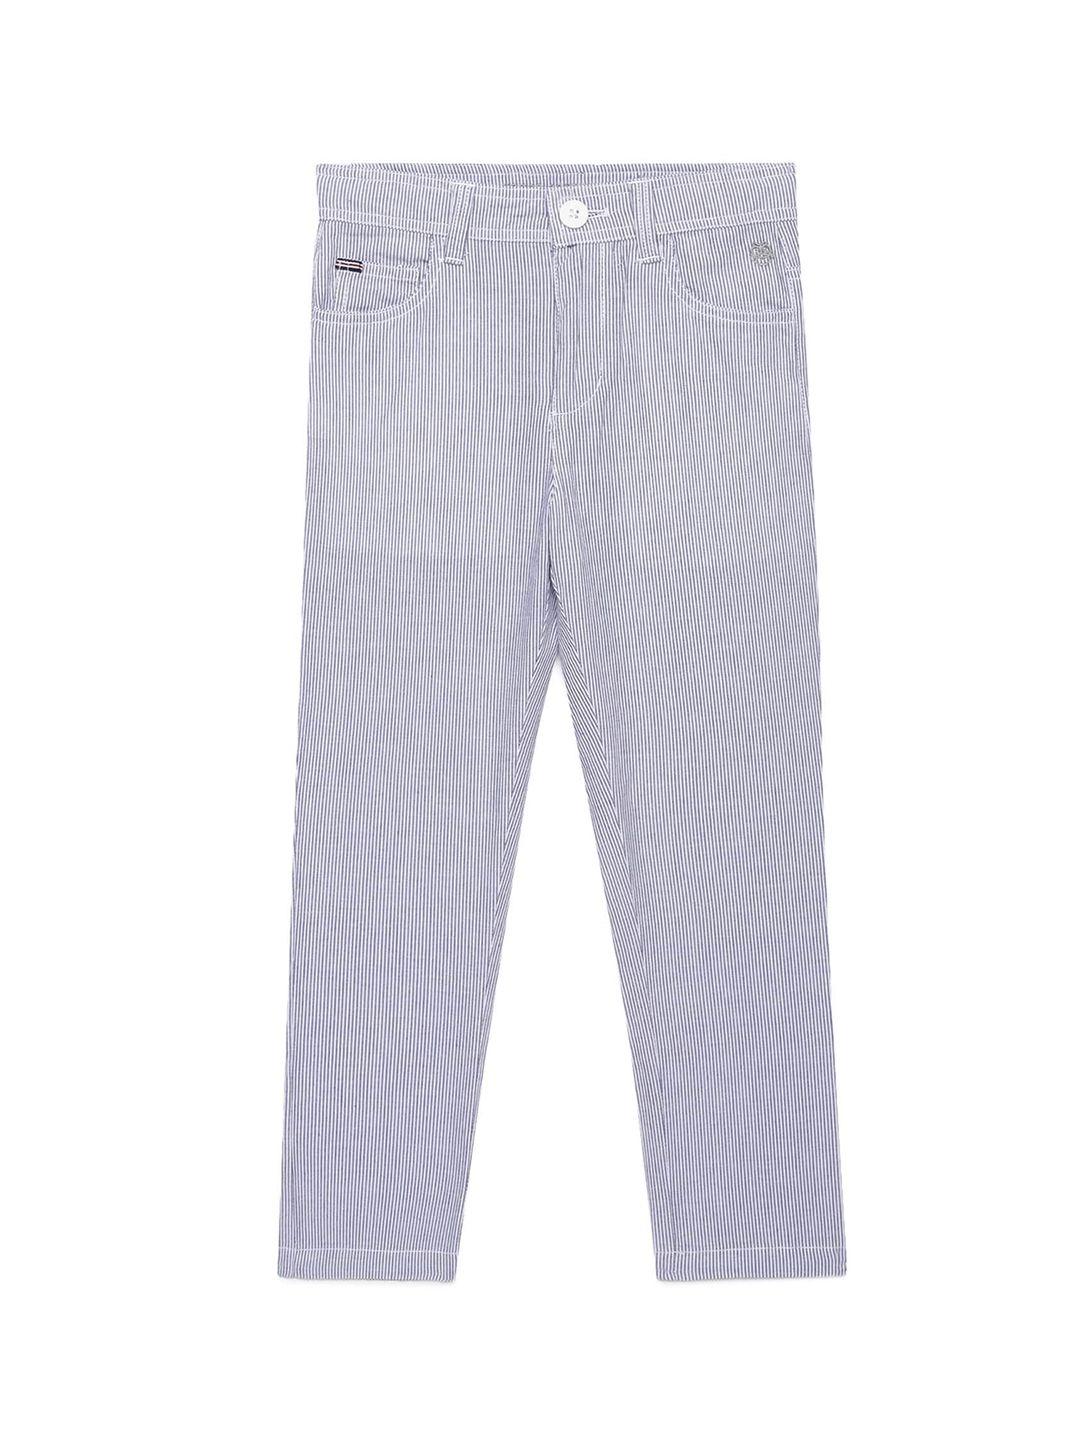 under fourteen only boys grey striped trousers